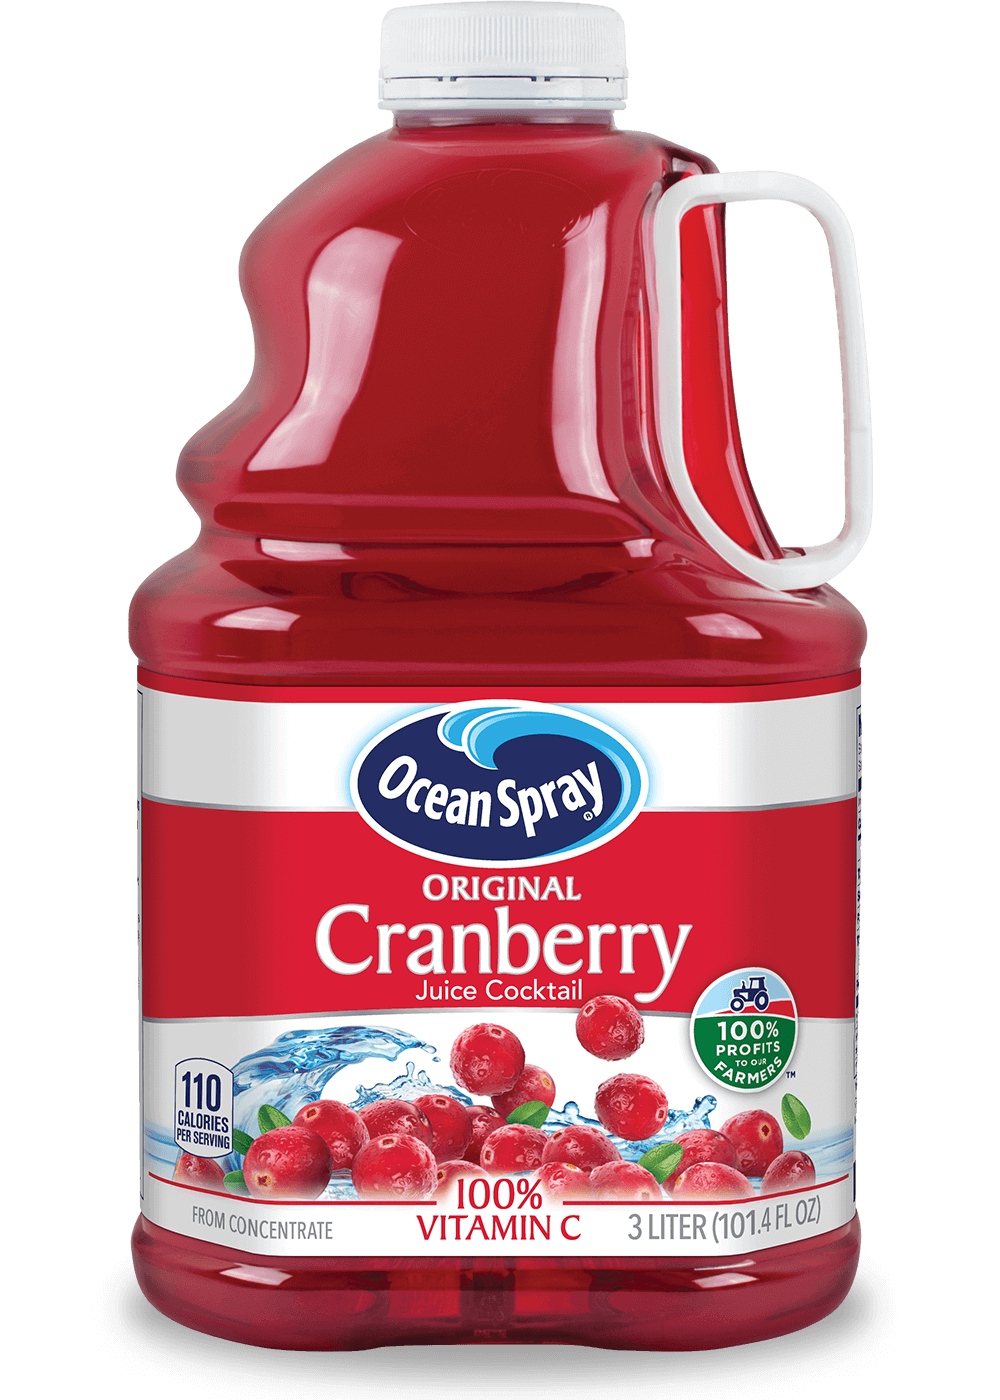 31 Ocean Spray Cranberry Juice Label Labels For You